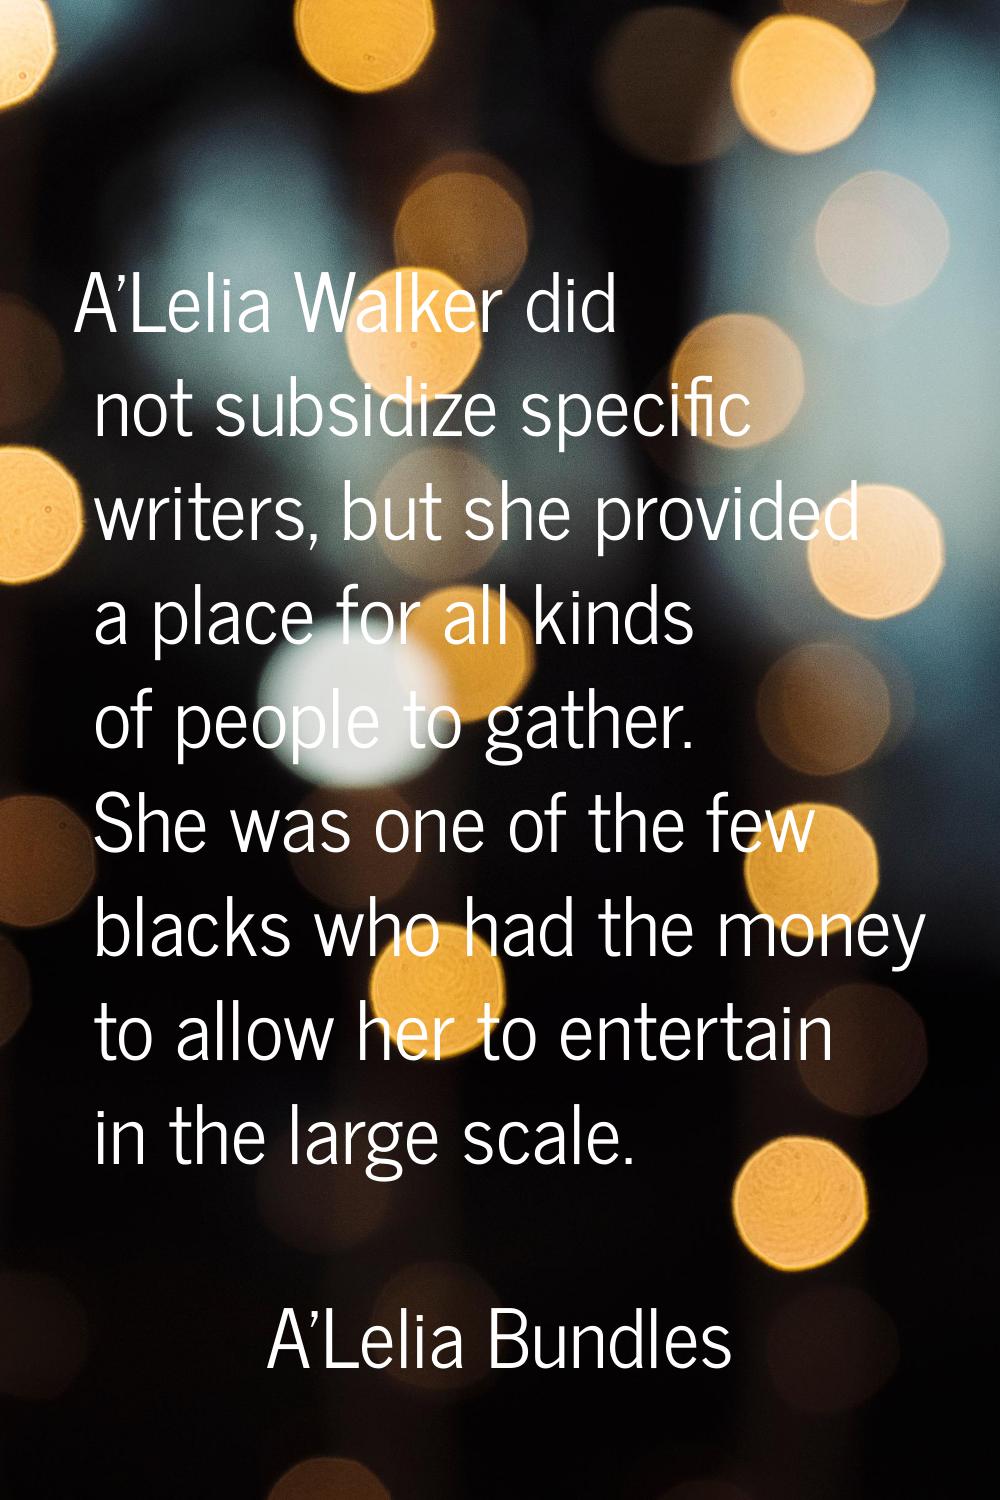 A'Lelia Walker did not subsidize specific writers, but she provided a place for all kinds of people